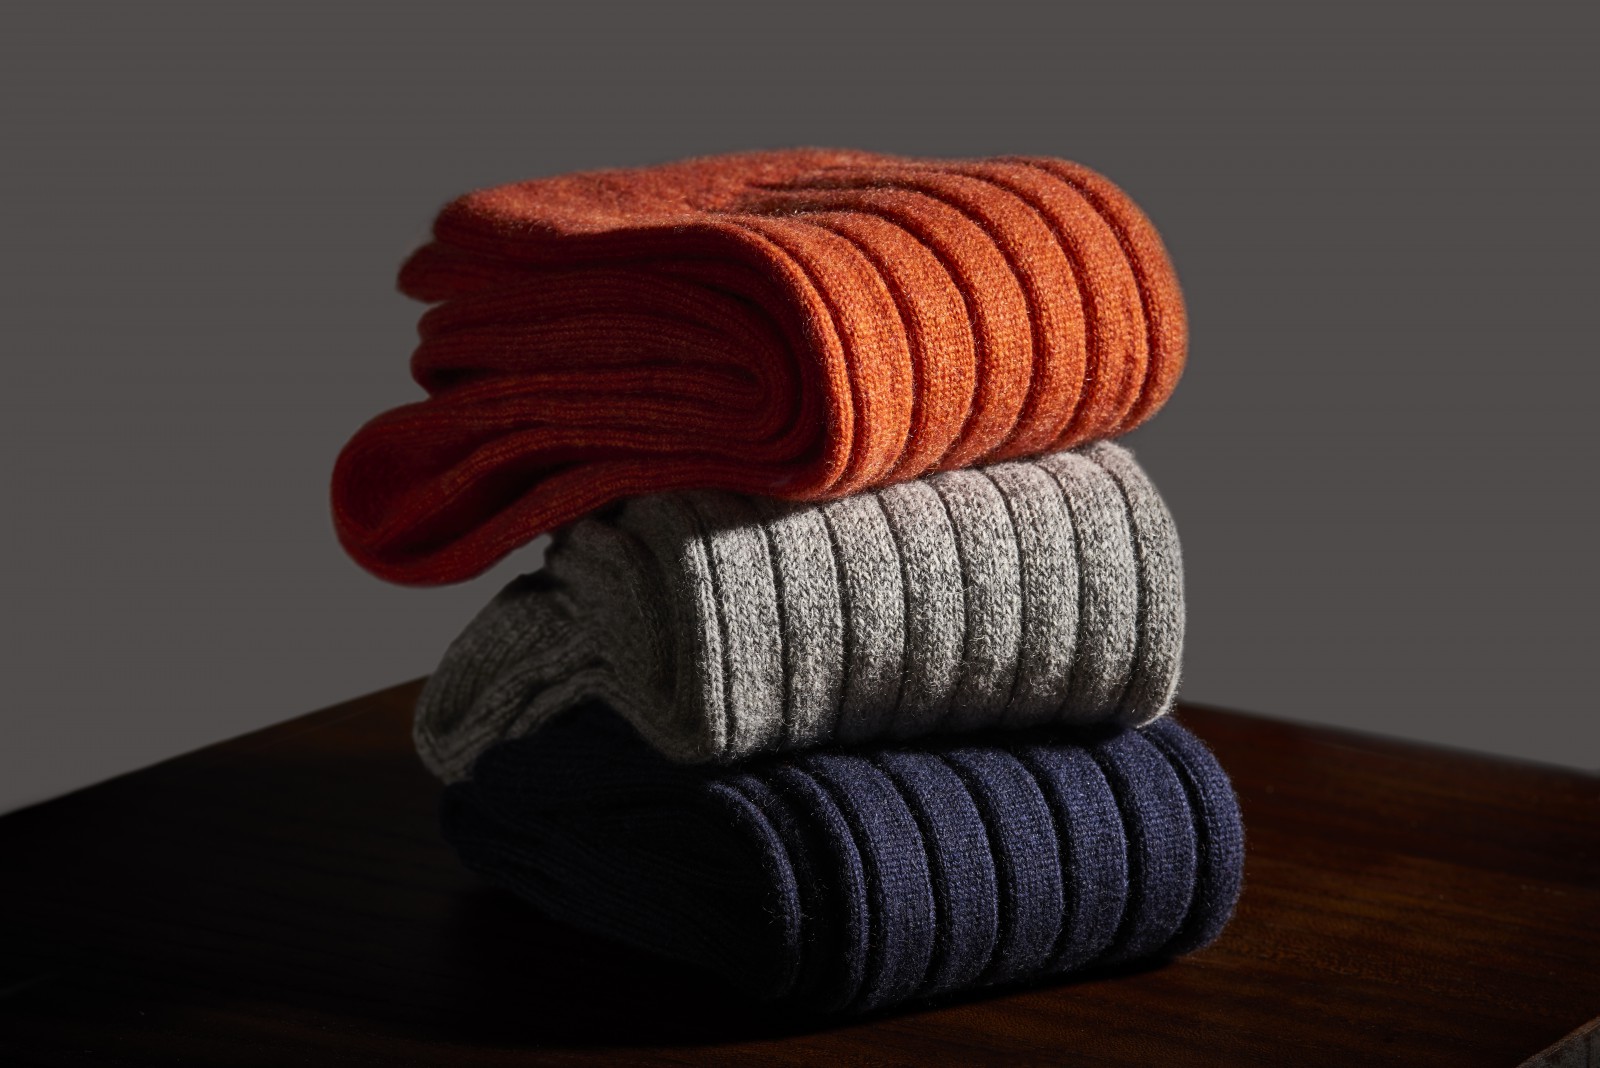 Three socks piled on top of each other, in orange, grey and blue